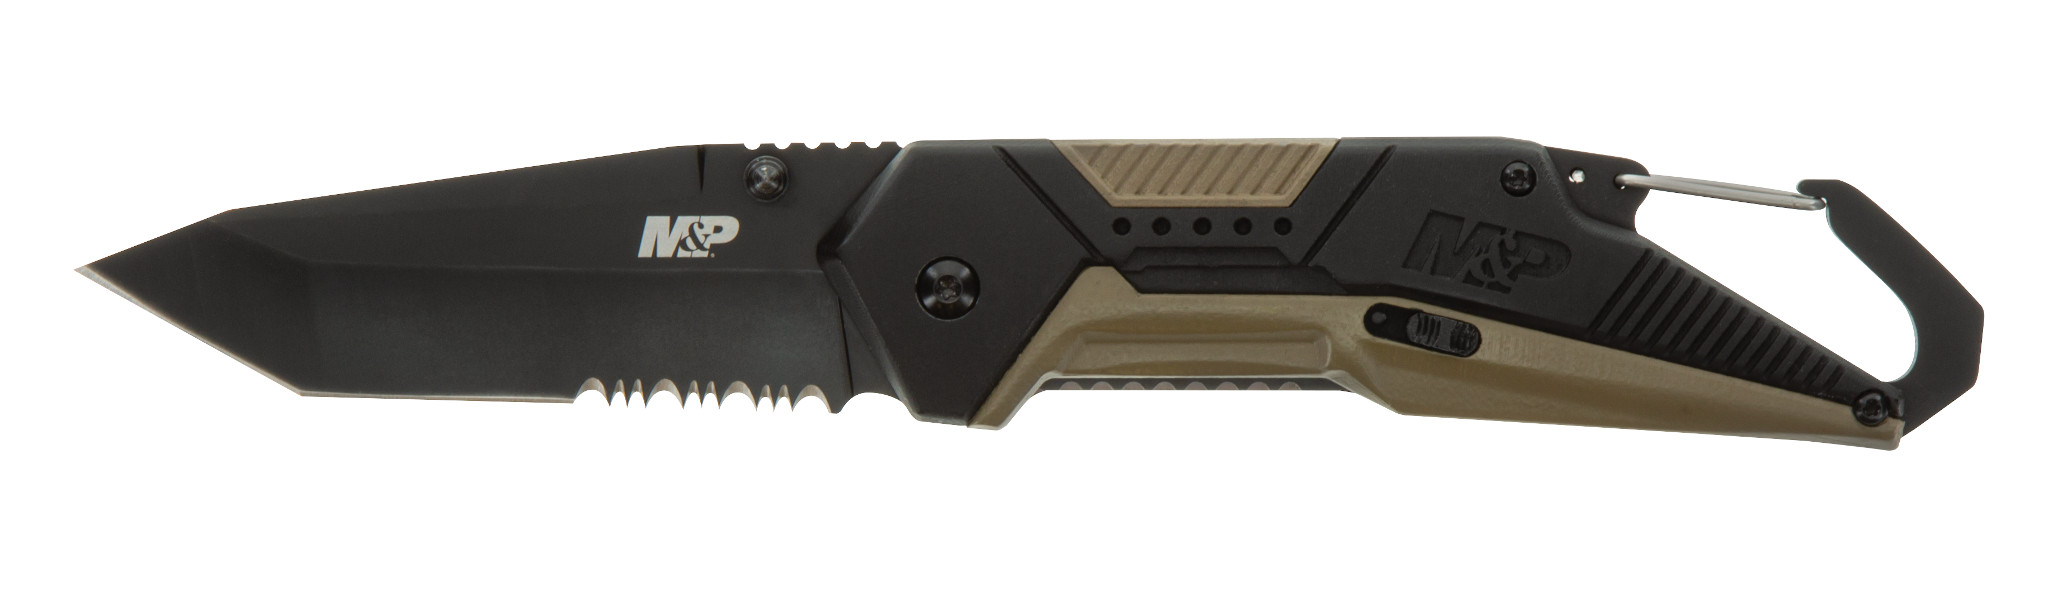 American Outdoor Brands - Repo Spring Assist Folding Knife CP=3 -  1117199